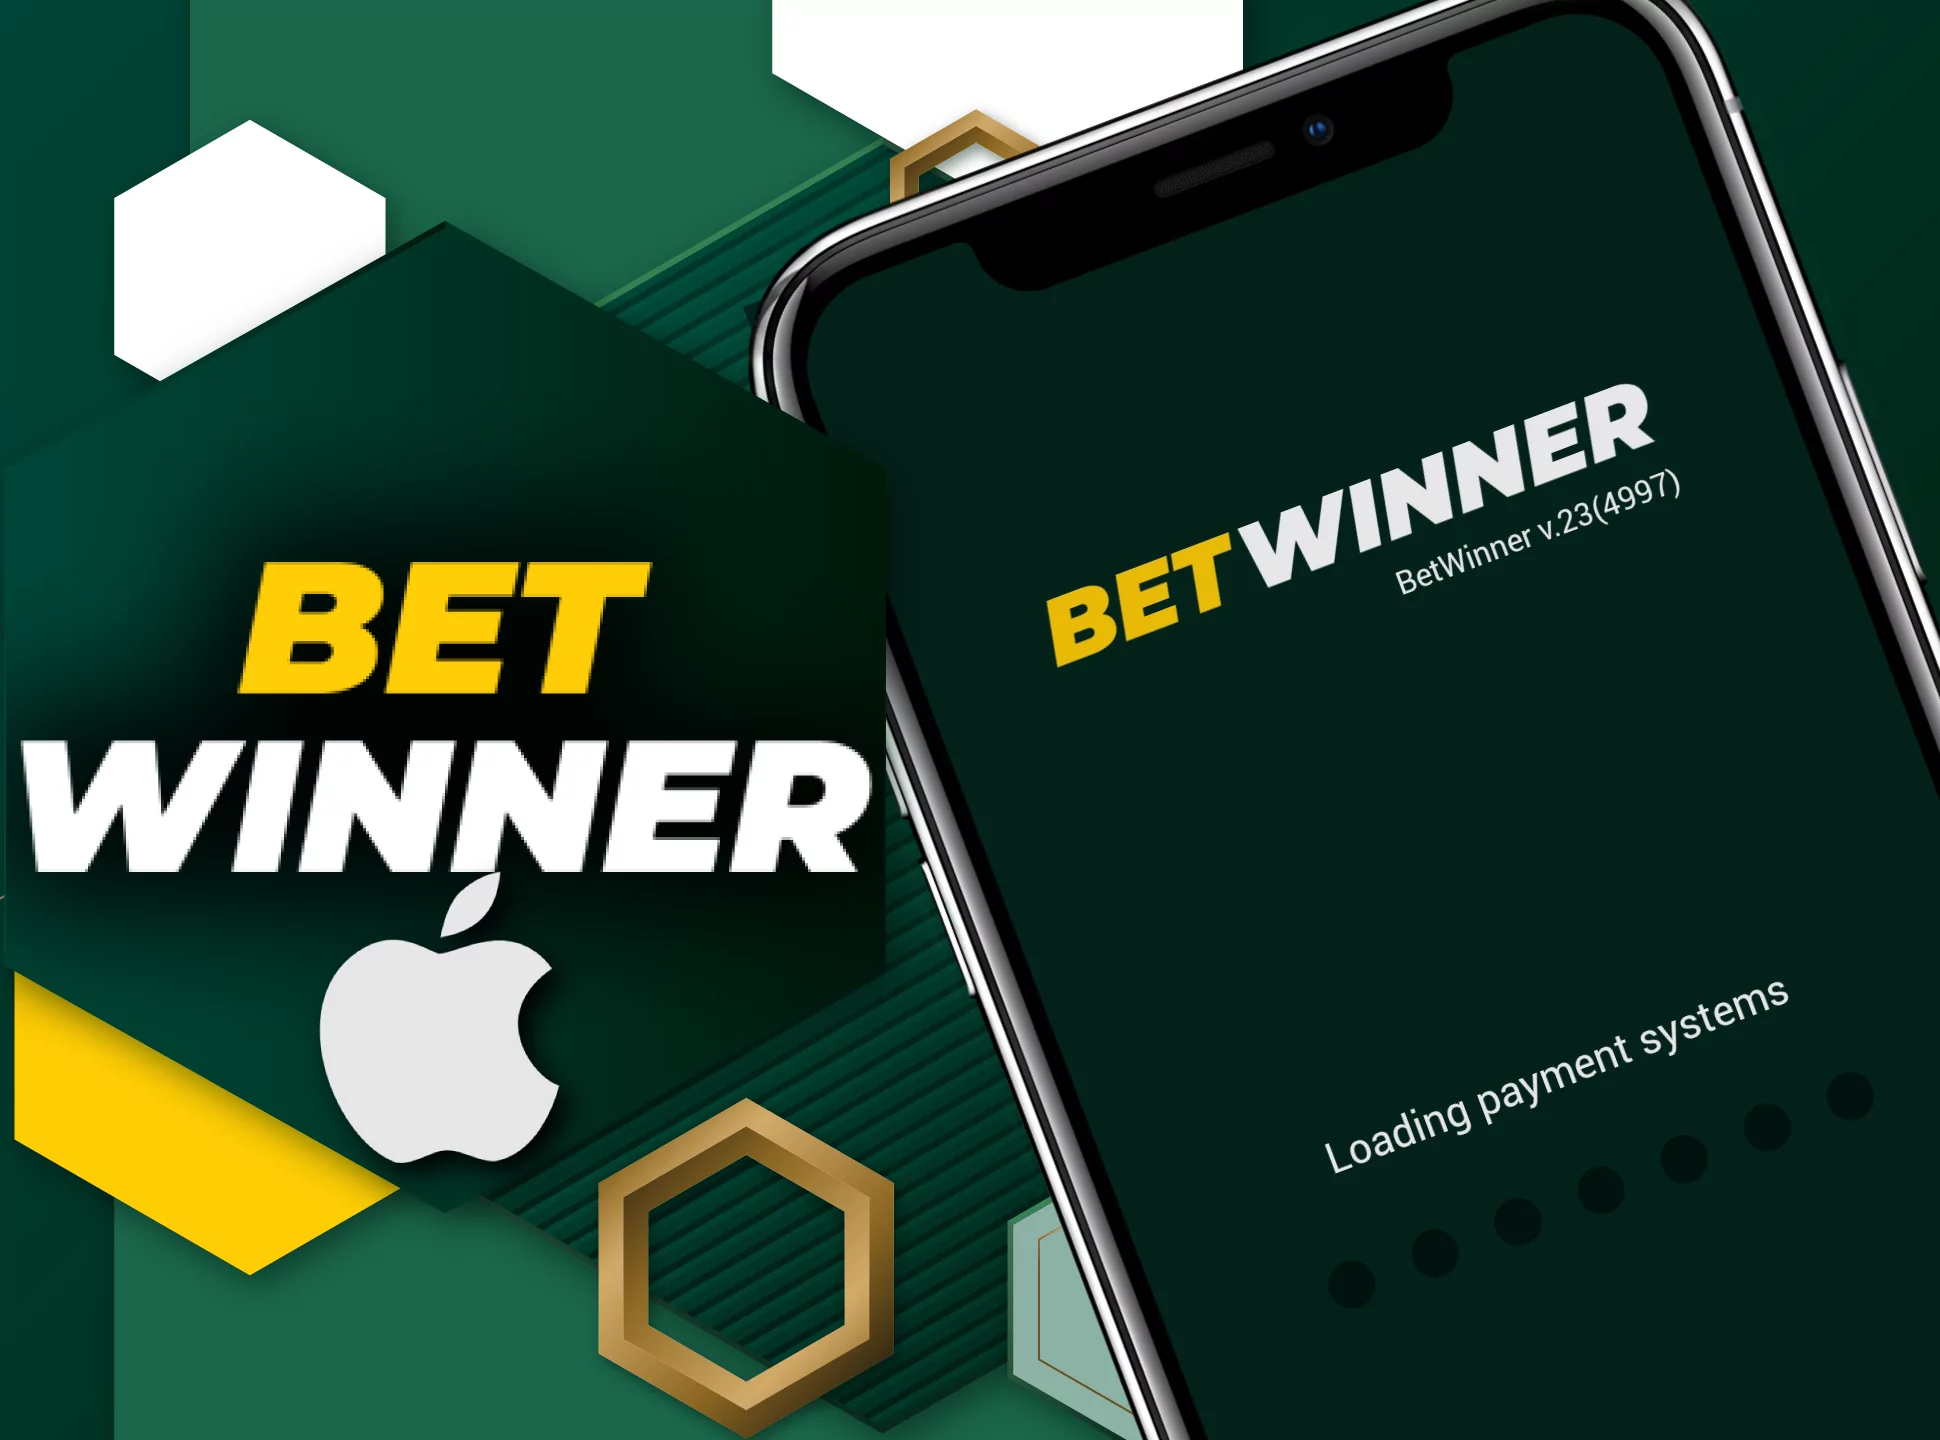 How To Save Money with betwinner?